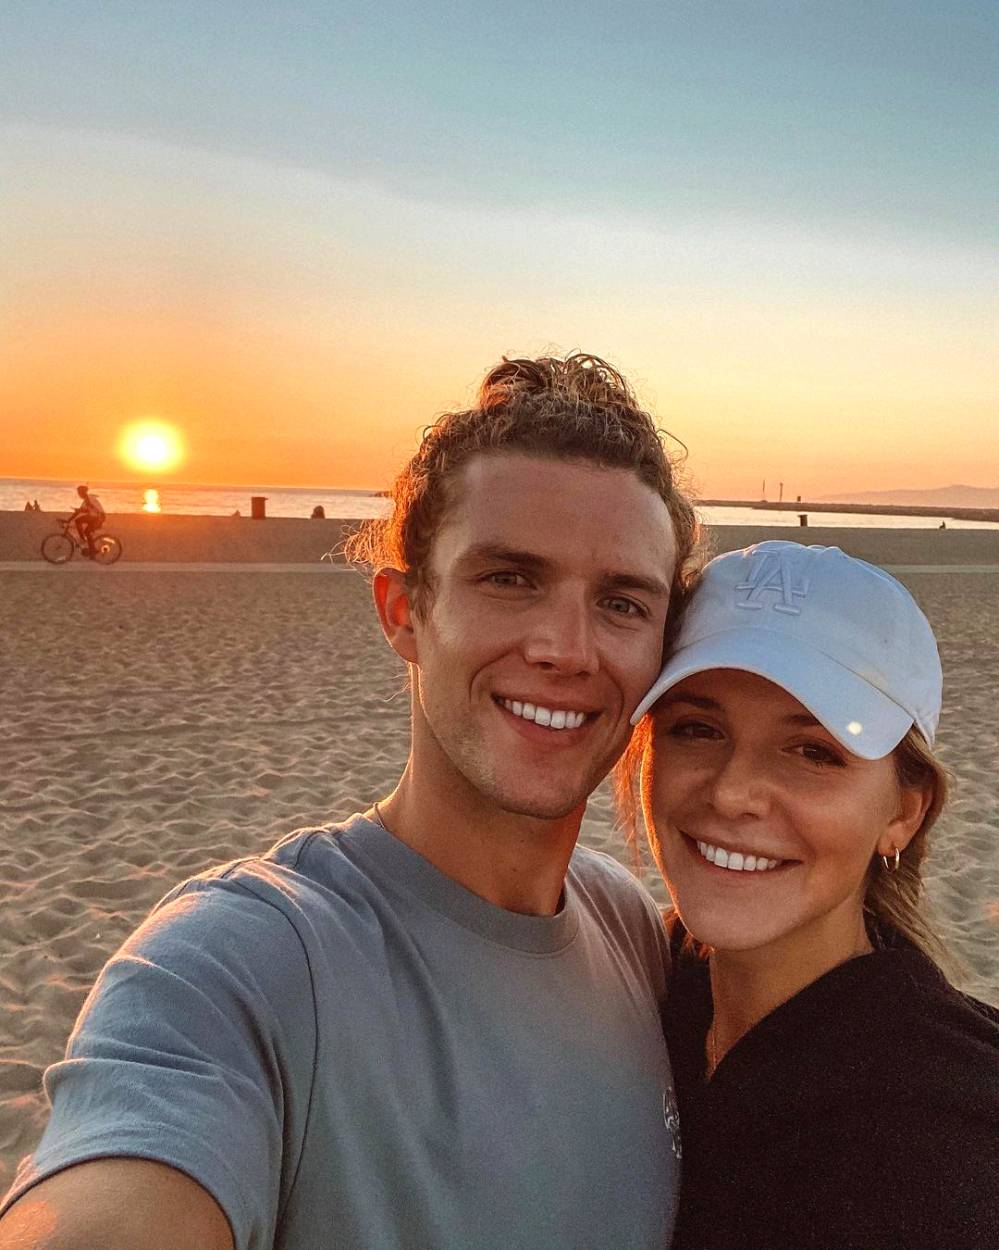 Big Brother's Angela Rummans and Tyler Crispen Are Engaged: 'Yes to Forever and Ever and Always'